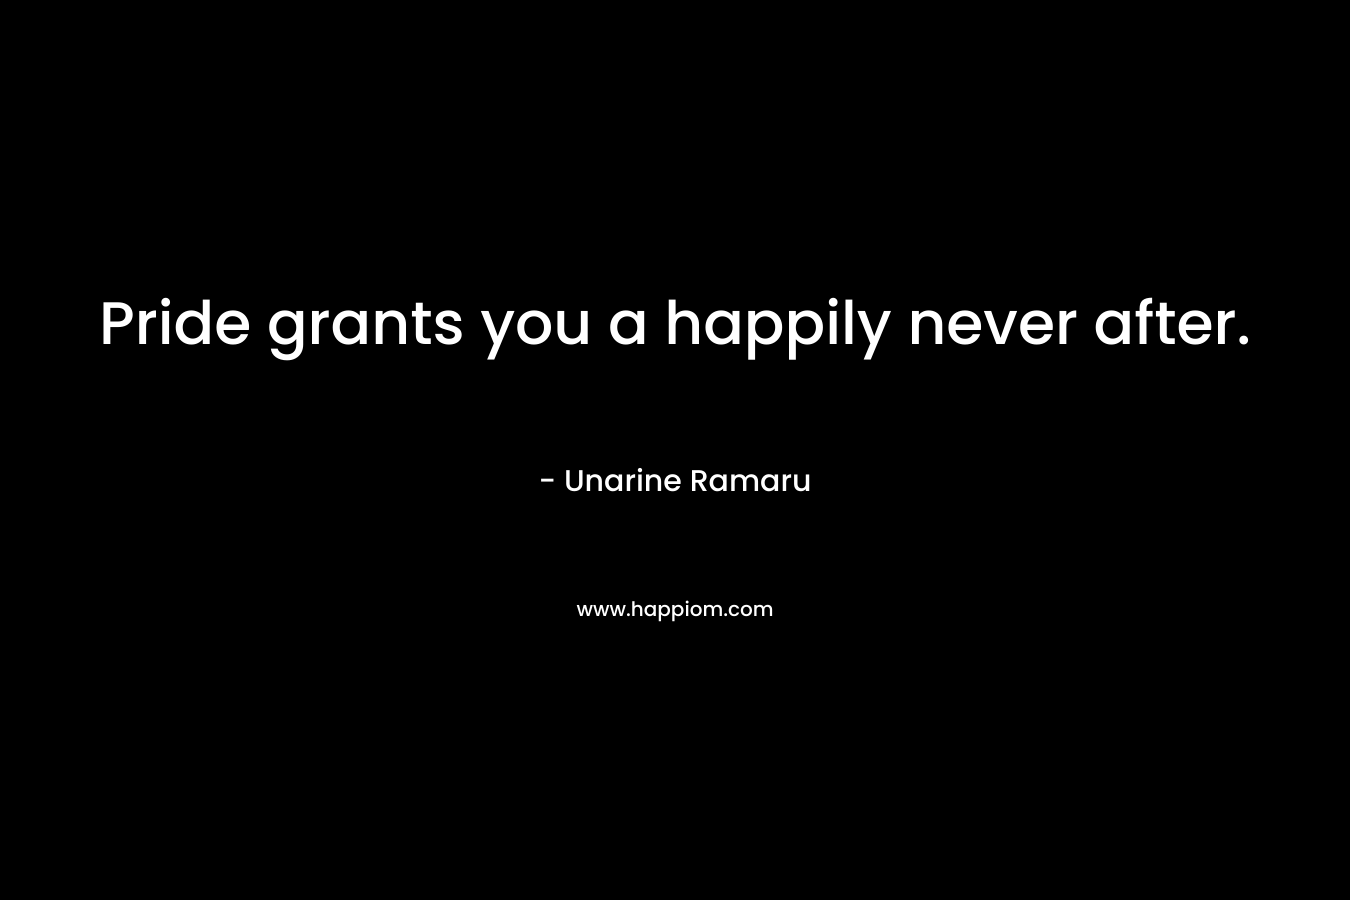 Pride grants you a happily never after. – Unarine Ramaru